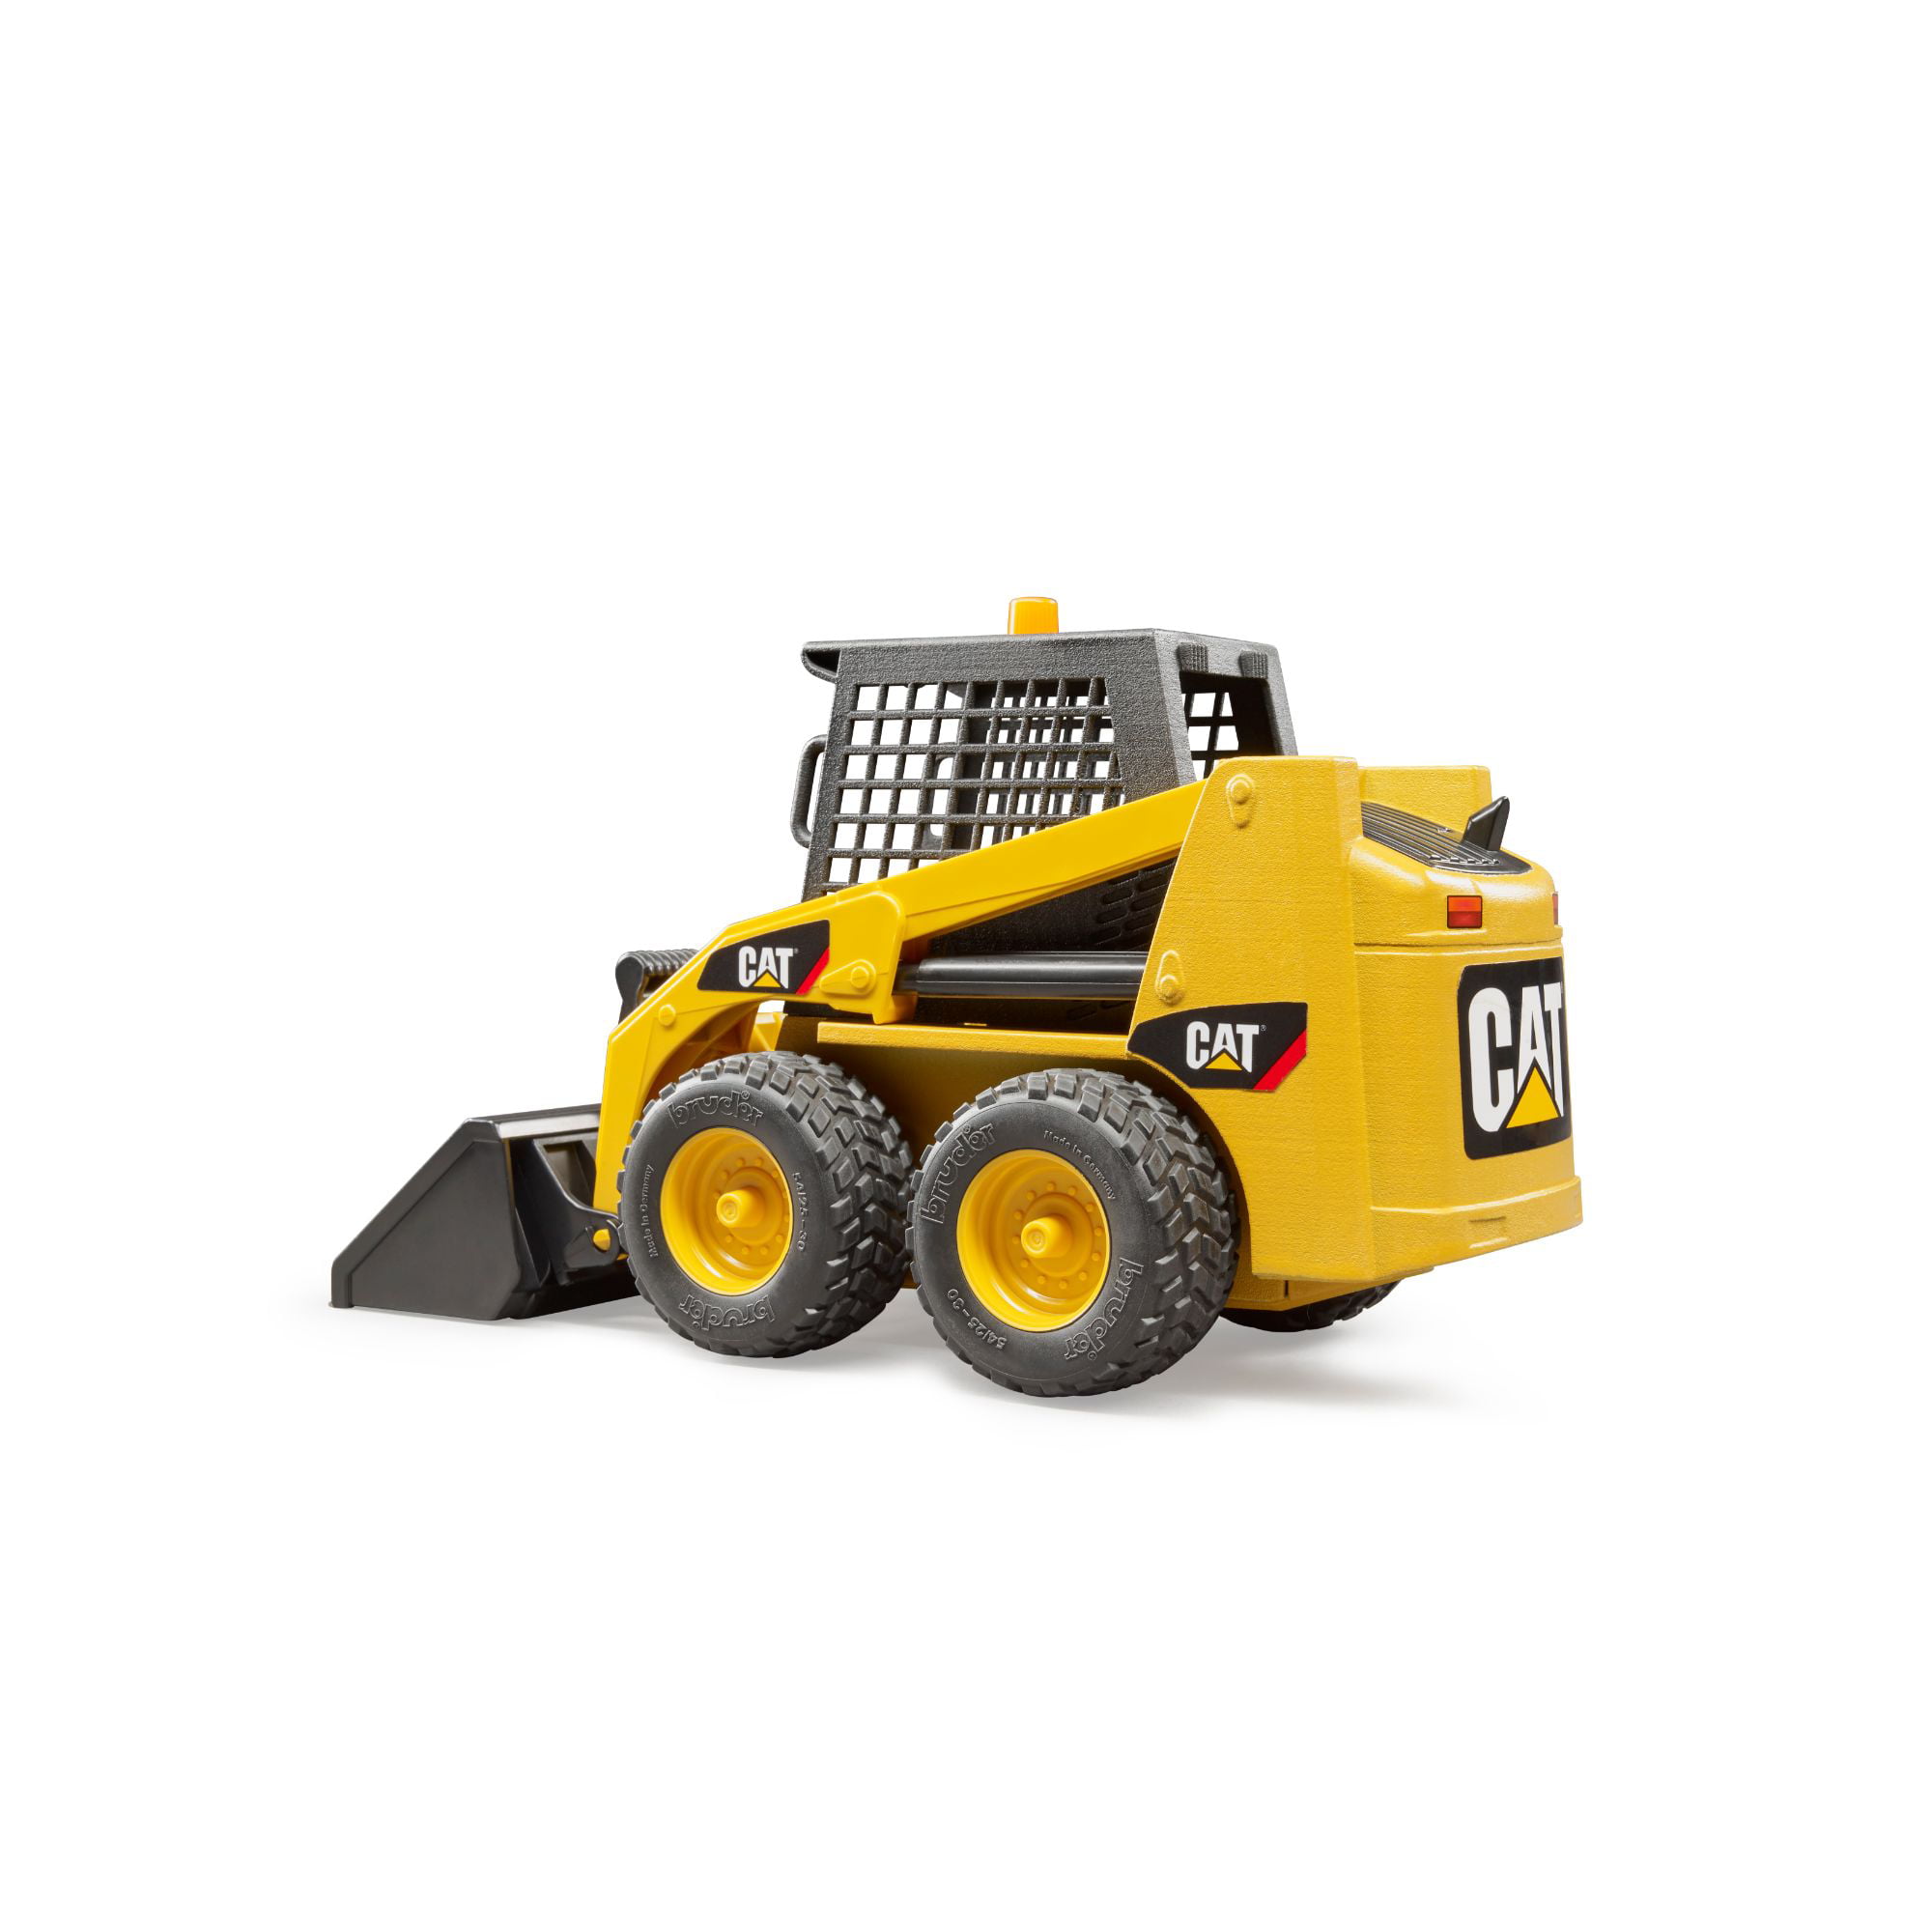 New Bruder Pro Series Caterpillar Skid Steer Loader 1:16 Scale Vehicle toy 